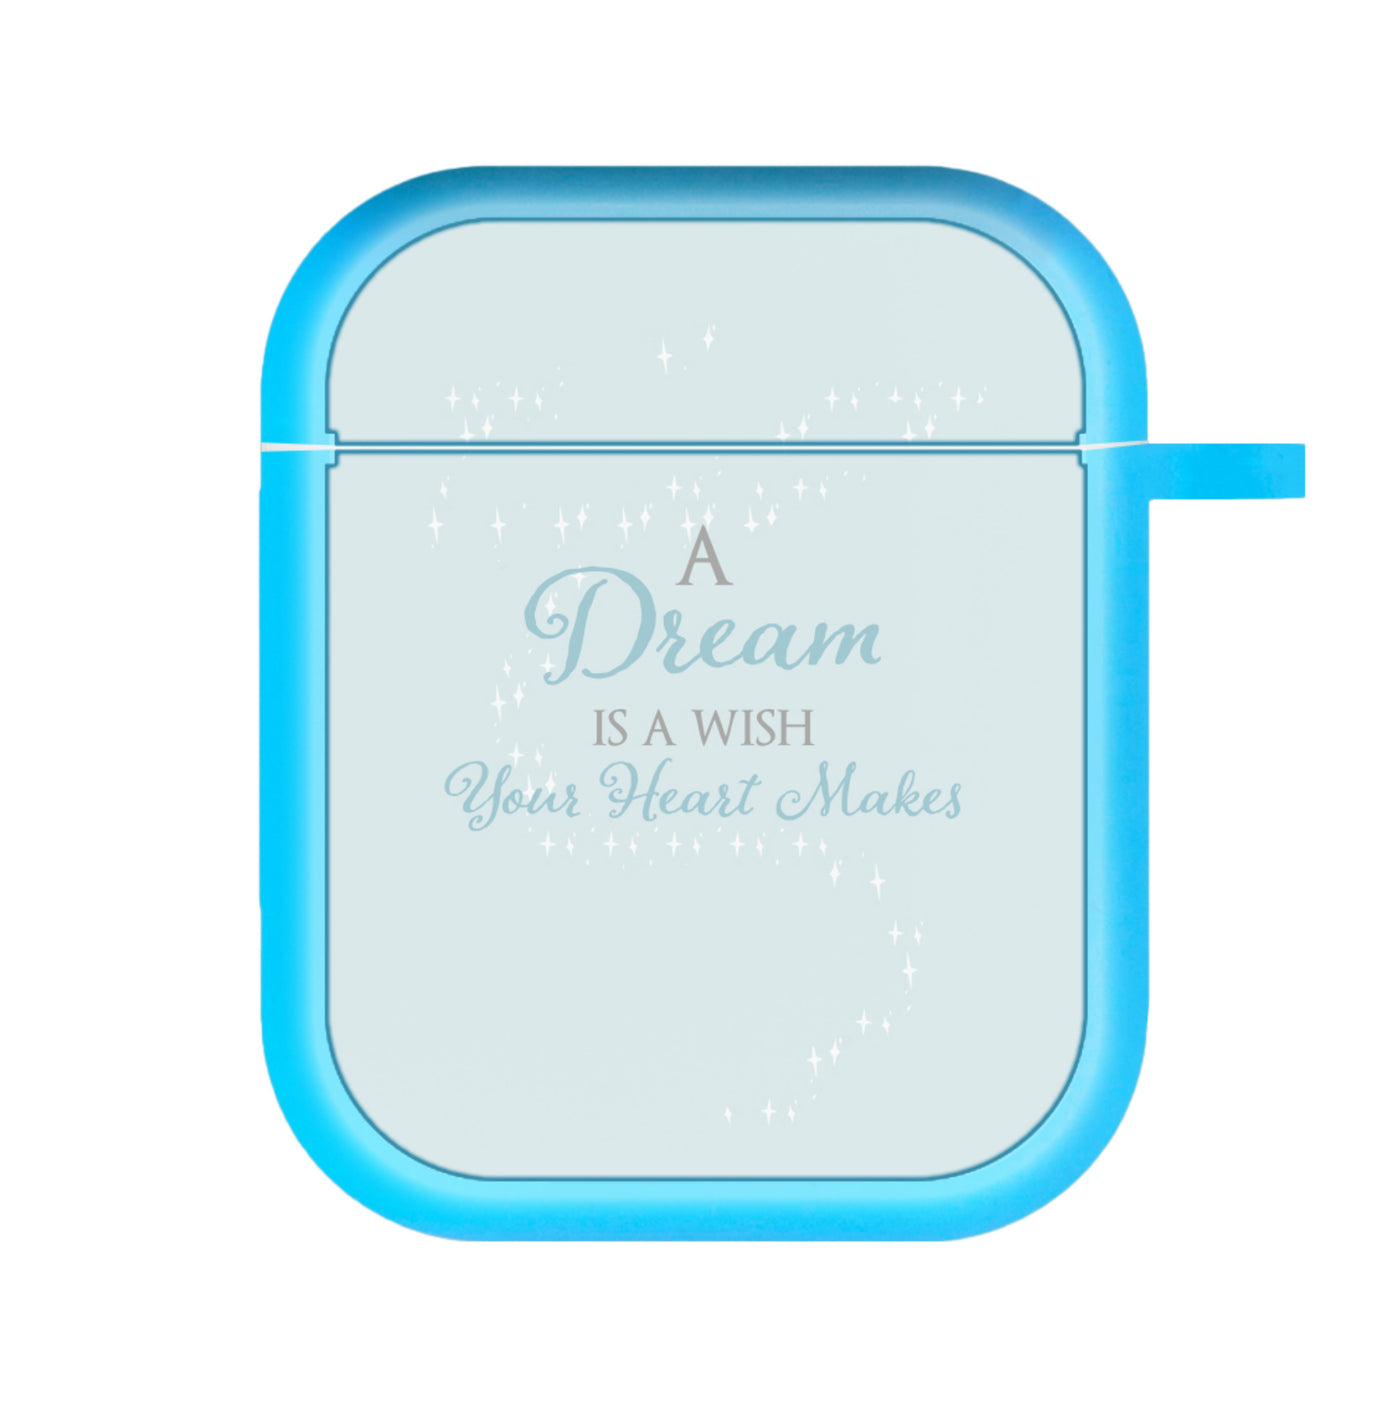 A Dream Is A Wish Your Heart Makes - Disney AirPods Case